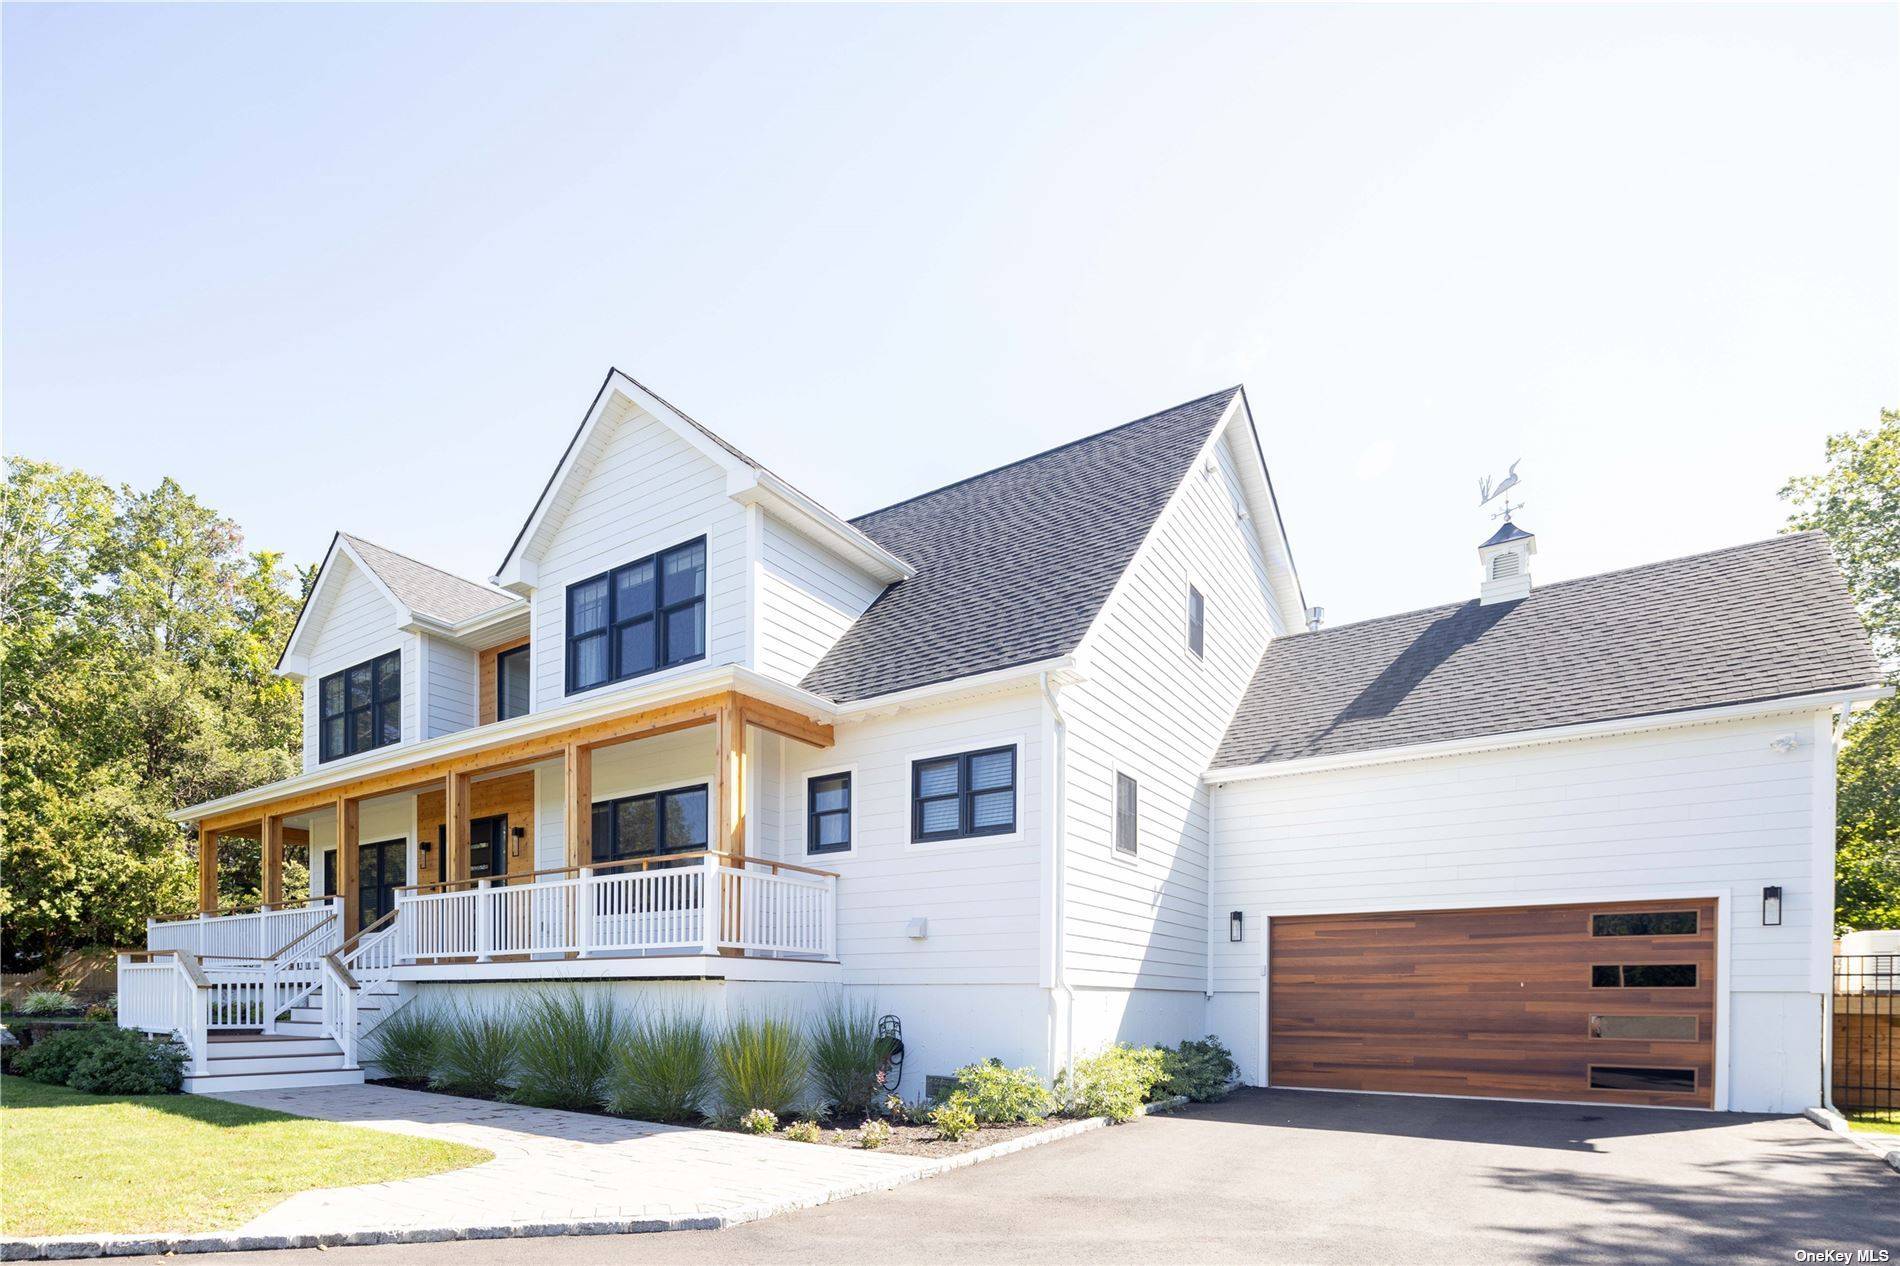 Enjoy this spacious and stunning new construction in East Quogue off season with its perfect location, south of the highway and close to the village.